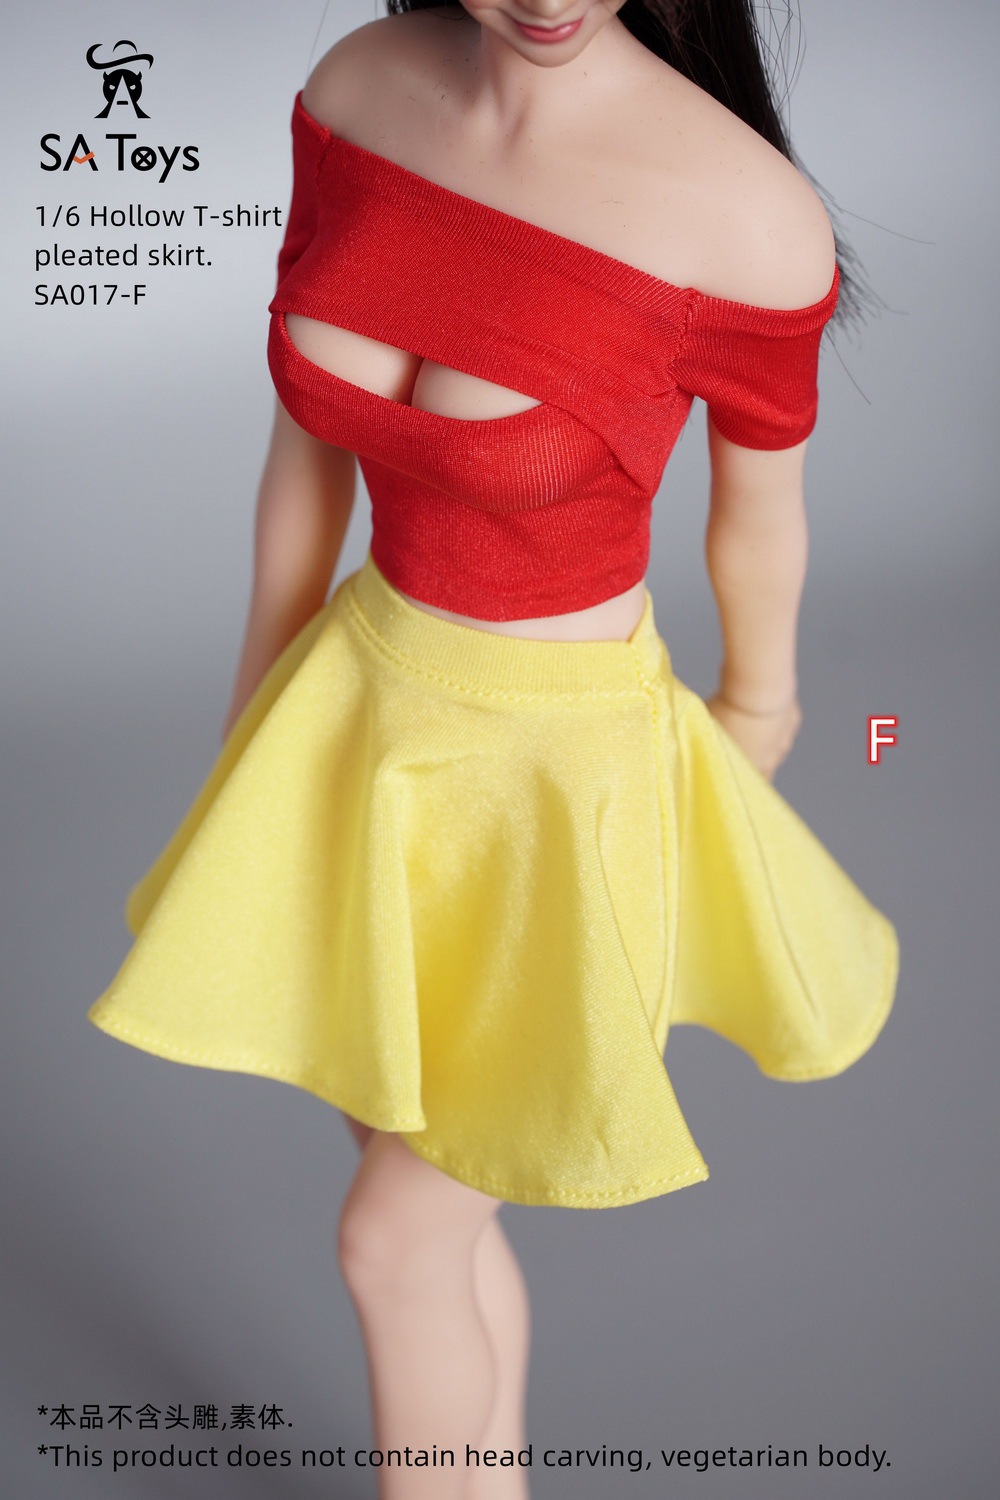 posterstyledress - NEW PRODUCT: SA Toys: 1/6 Personalized Poster Style Tight Dress/ Hollow T-shirt Pleated Skirt/Side Zipper Tight Skirt [Various styles available]  16560610